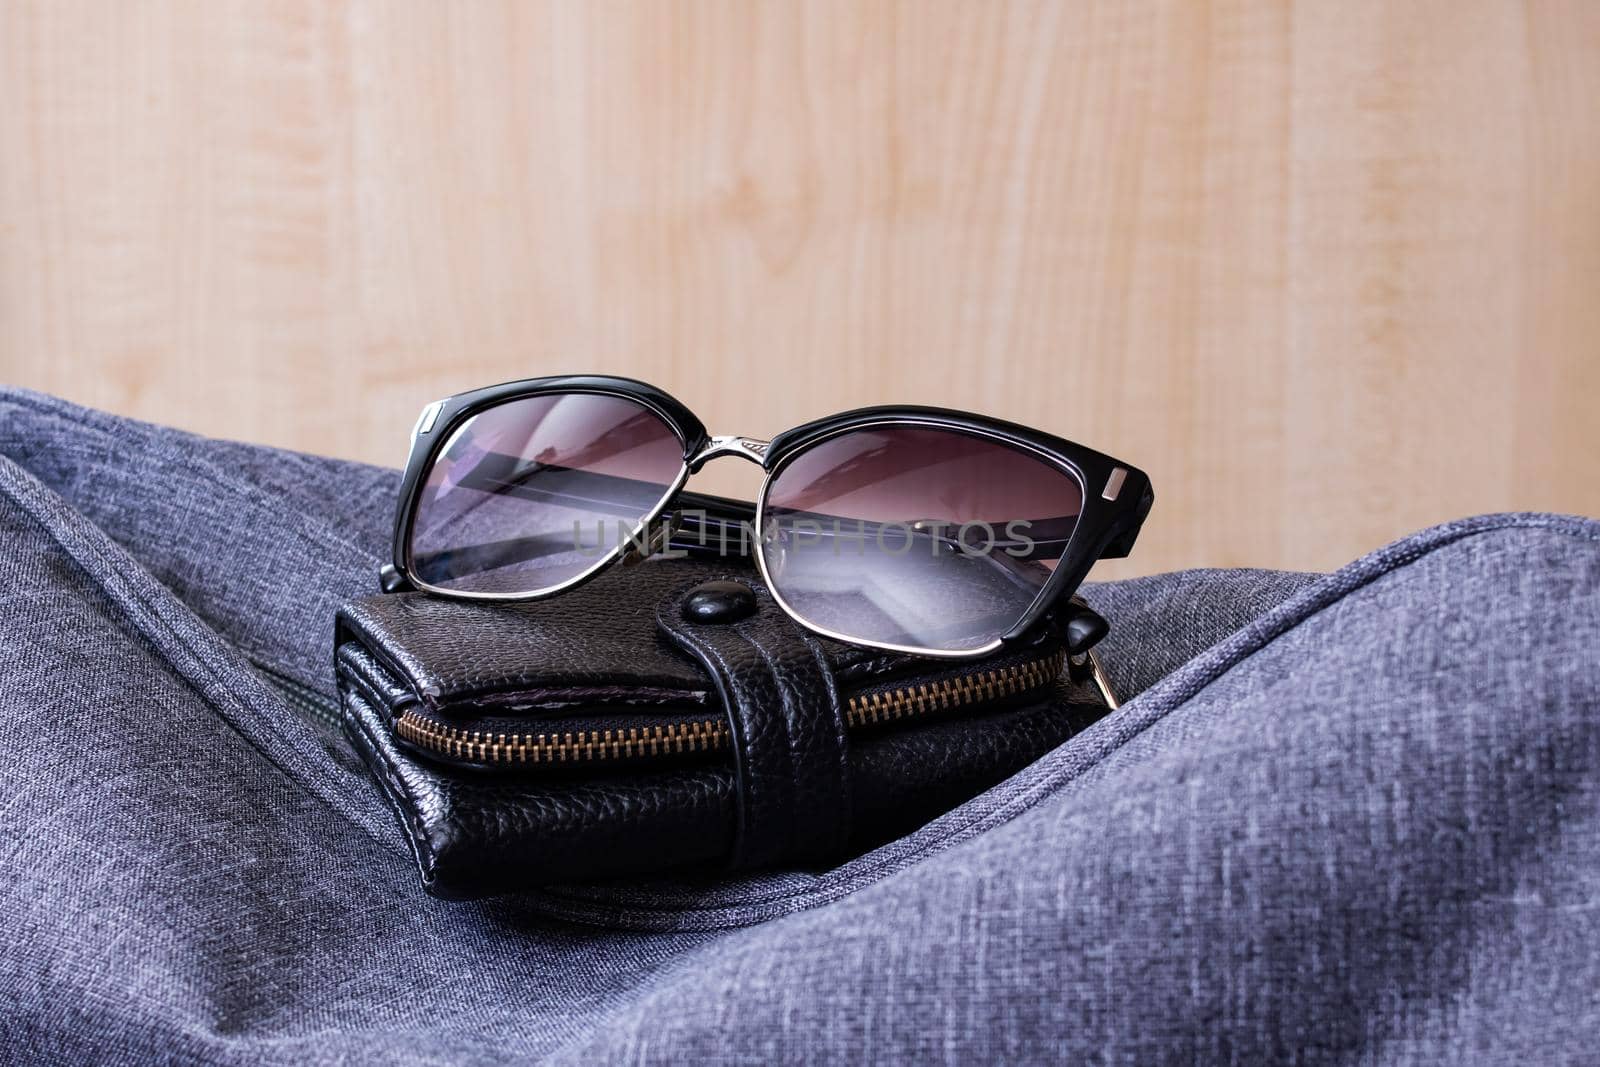 Wallet, sunglasses and travel bag on a wooden background